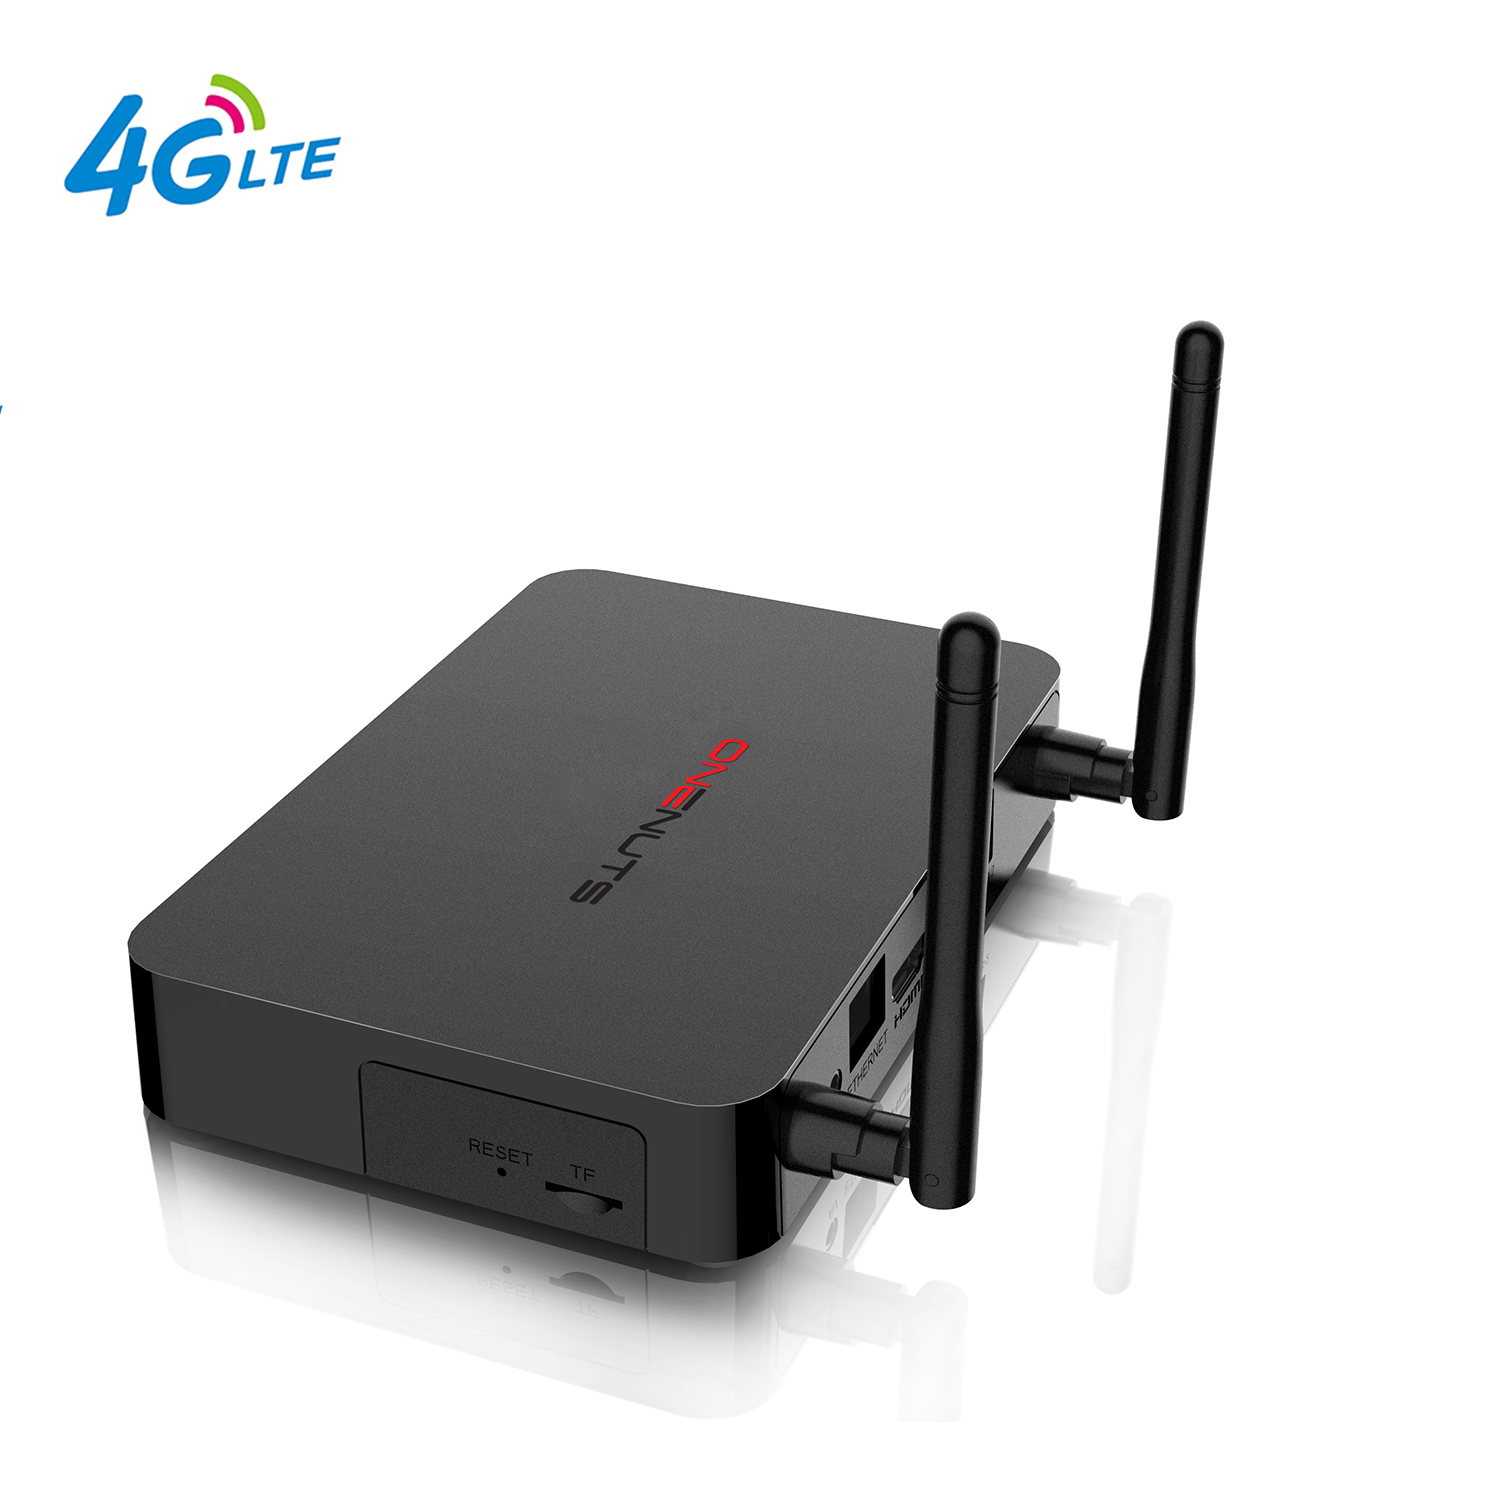 Android TV Box Huawei WCDMA Modem integriert, Android TV Box WCDMA 4G/3G Dongle